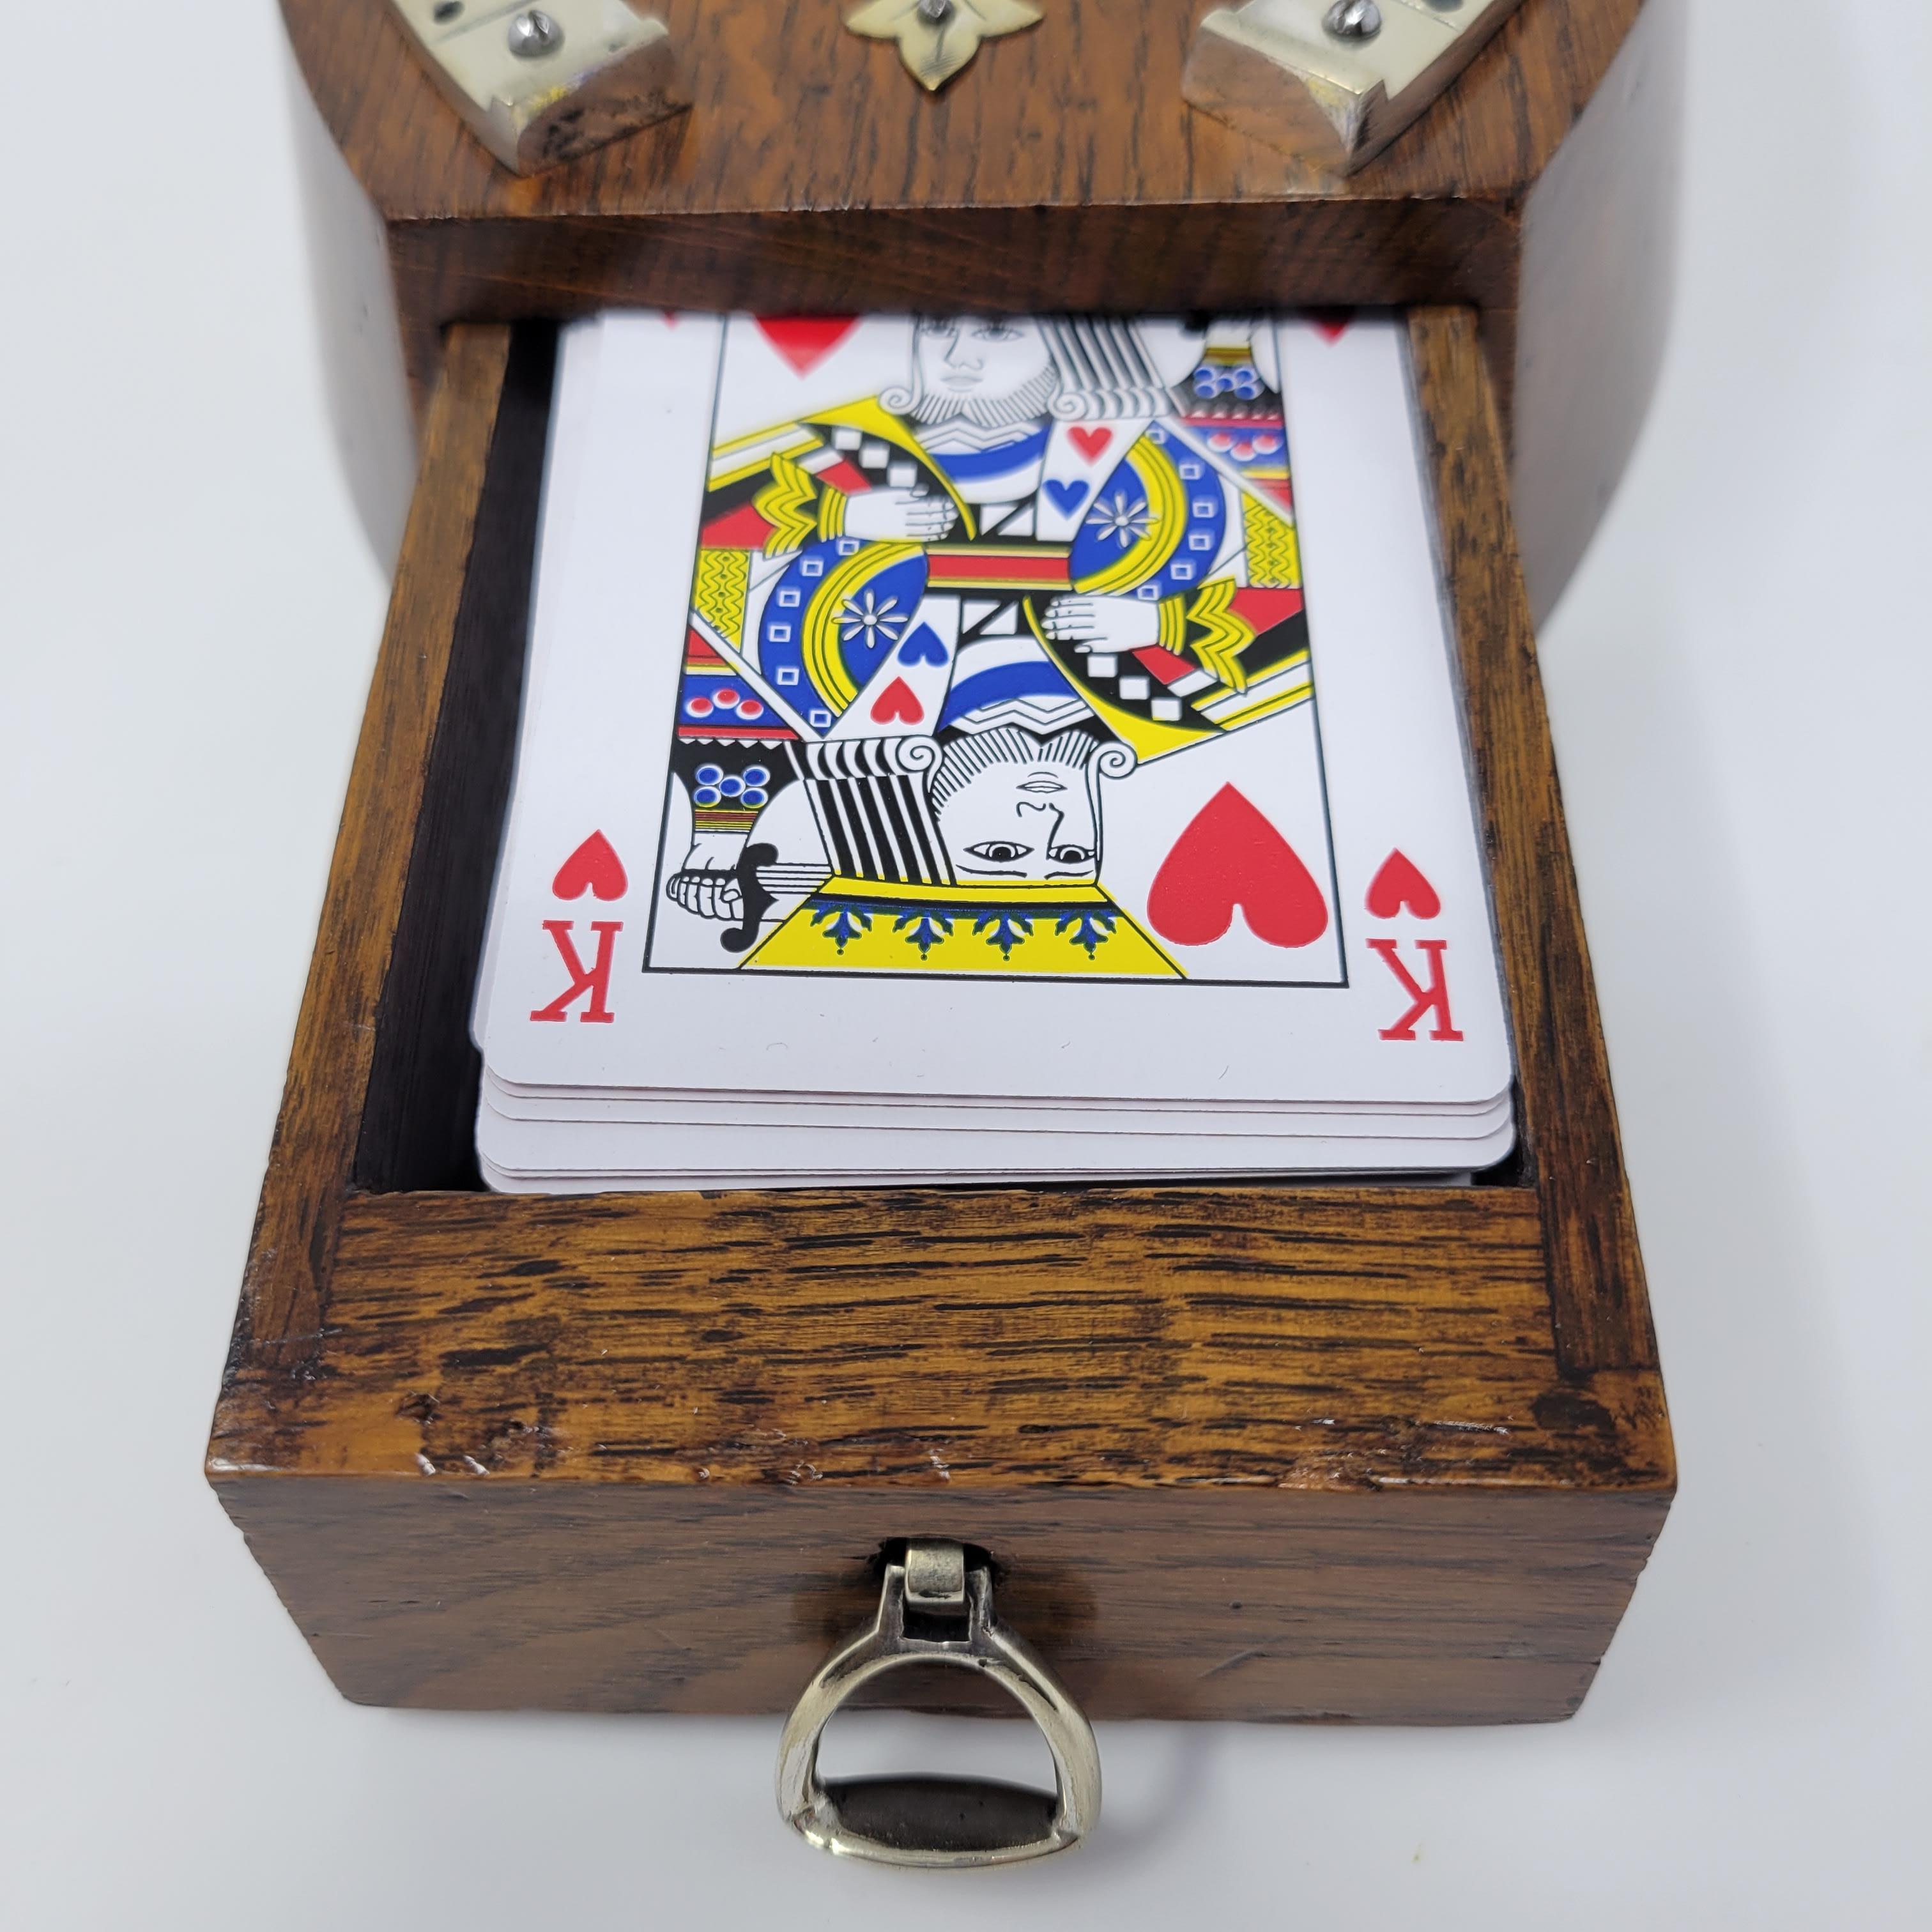 A very clever card box, designed in the shape of a horseshoe with a stirrup closure.